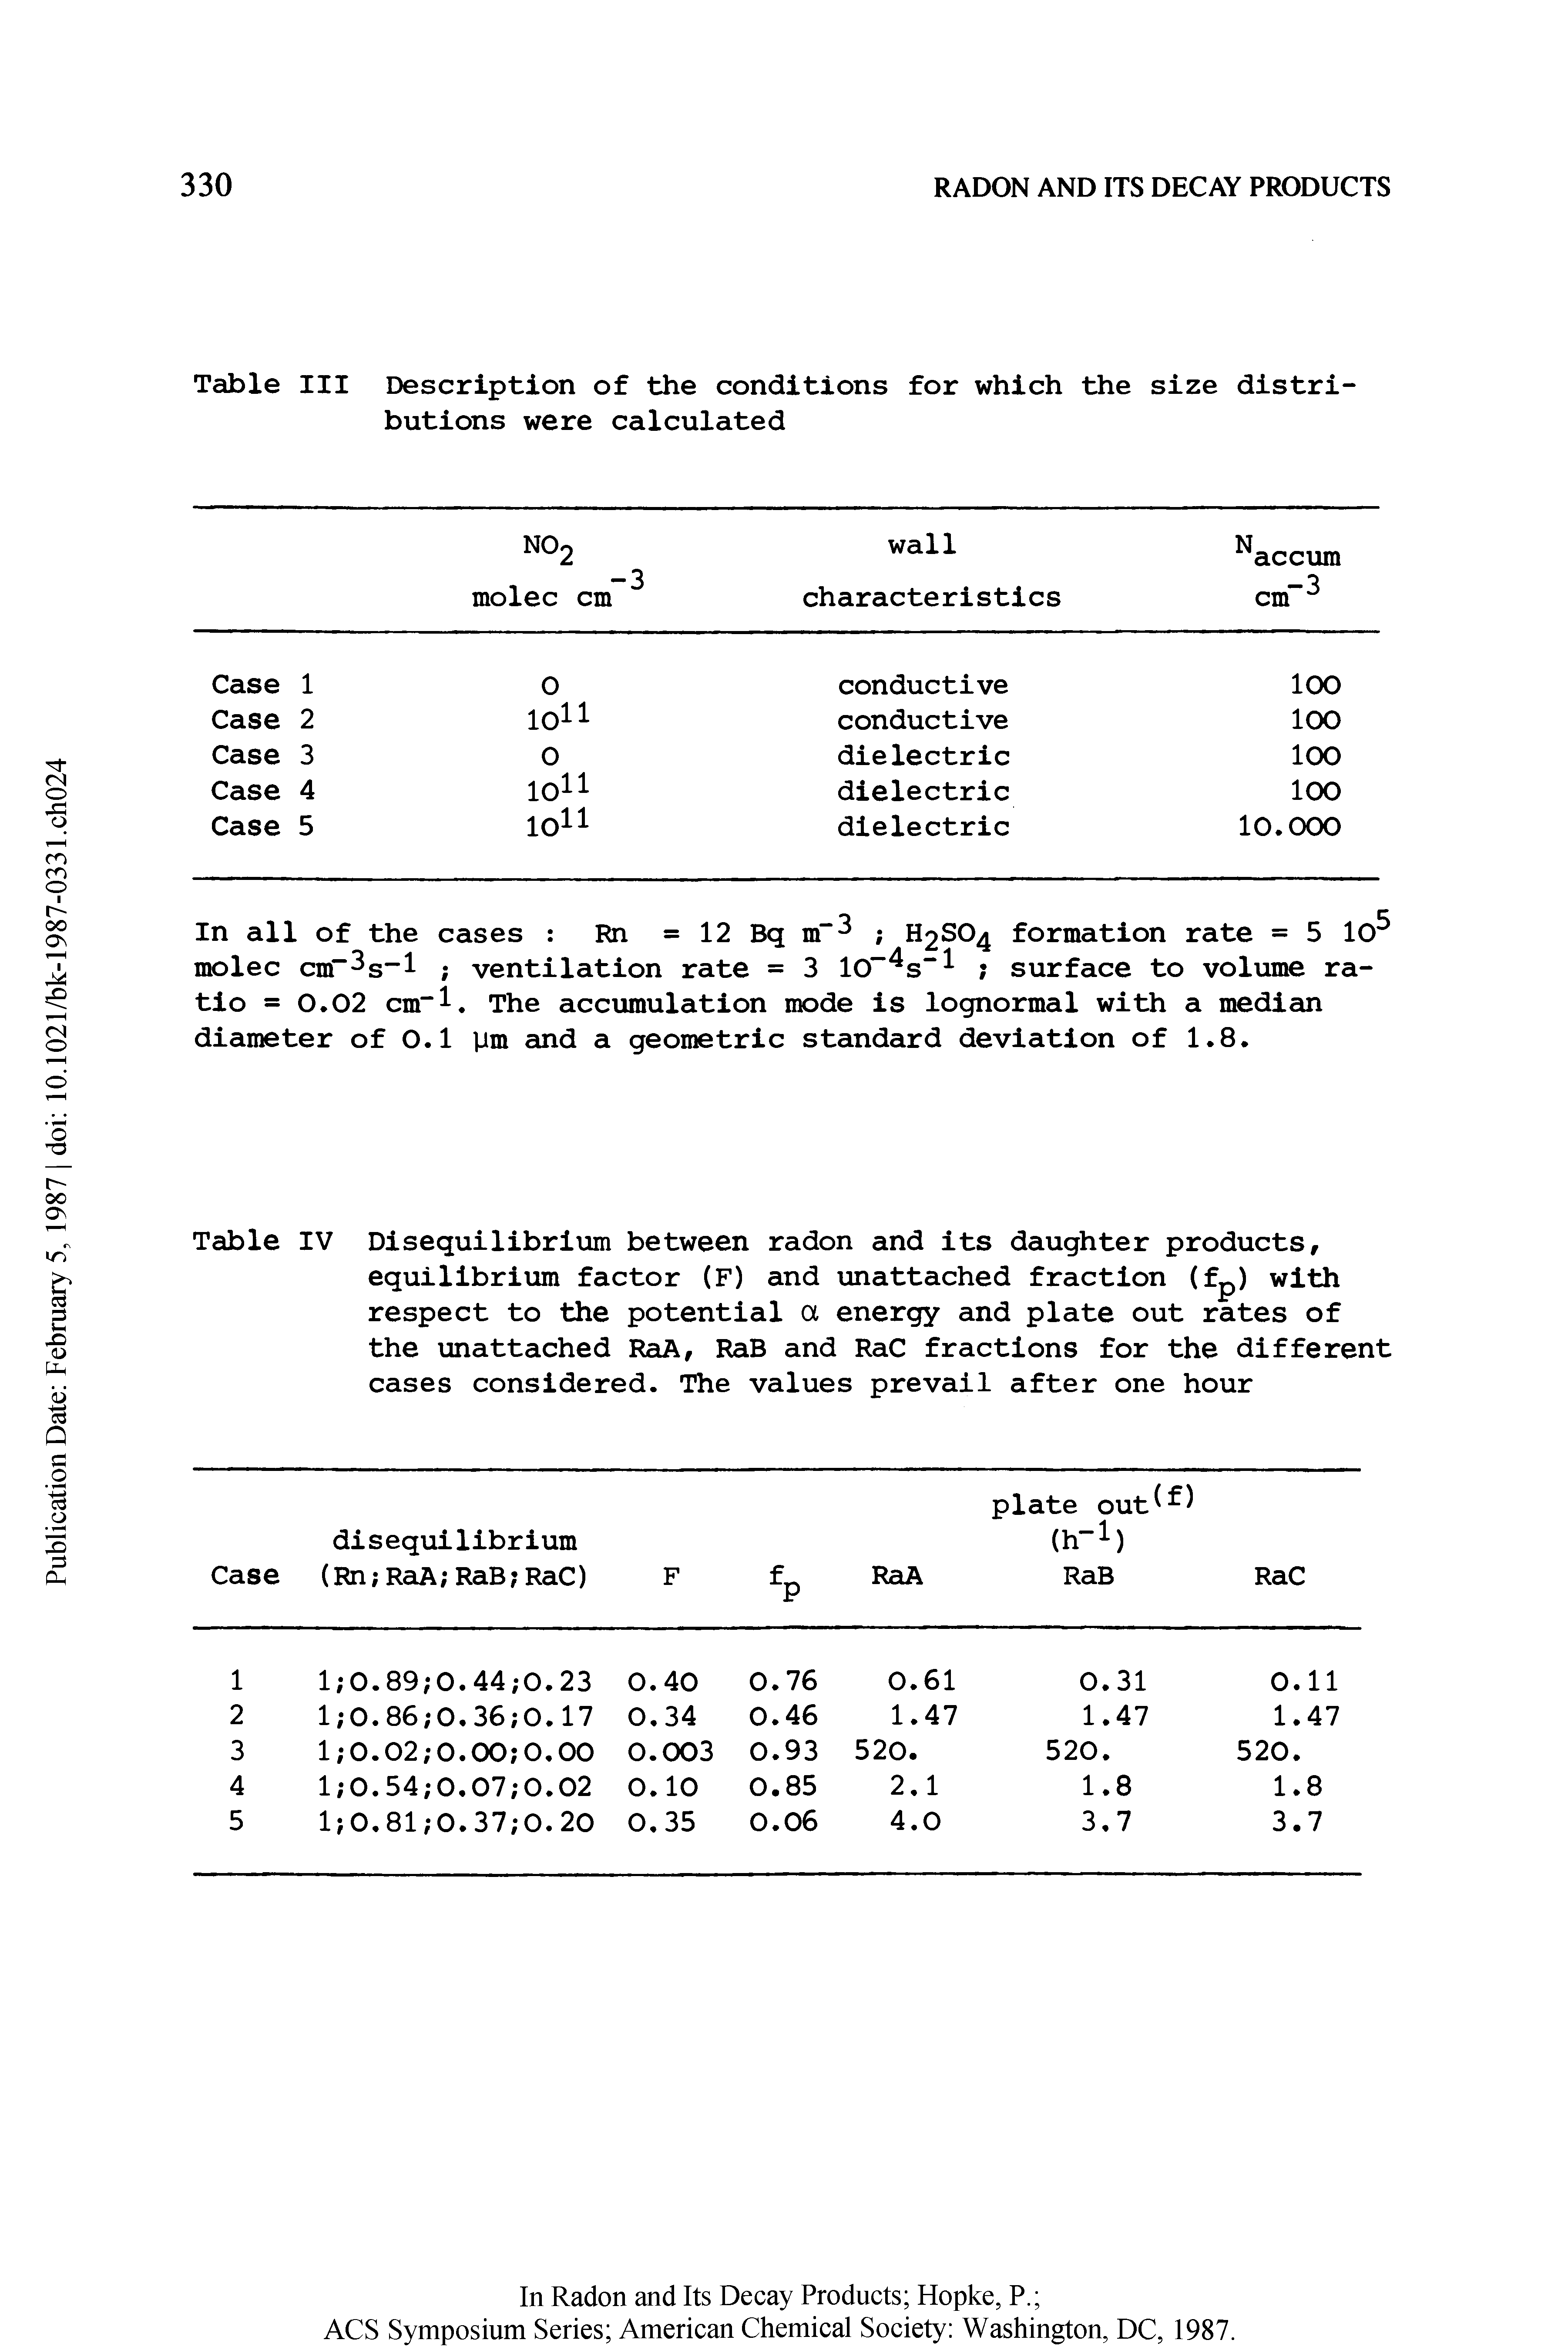 Table IV Disequilibrium between radon and its daughter products, equilibrium factor (F) and unattached fraction (fp) with respect to the potential a energy and plate out rates of the unattached RaA, RaB and RaC fractions for the different cases considered. The values prevail after one hour...